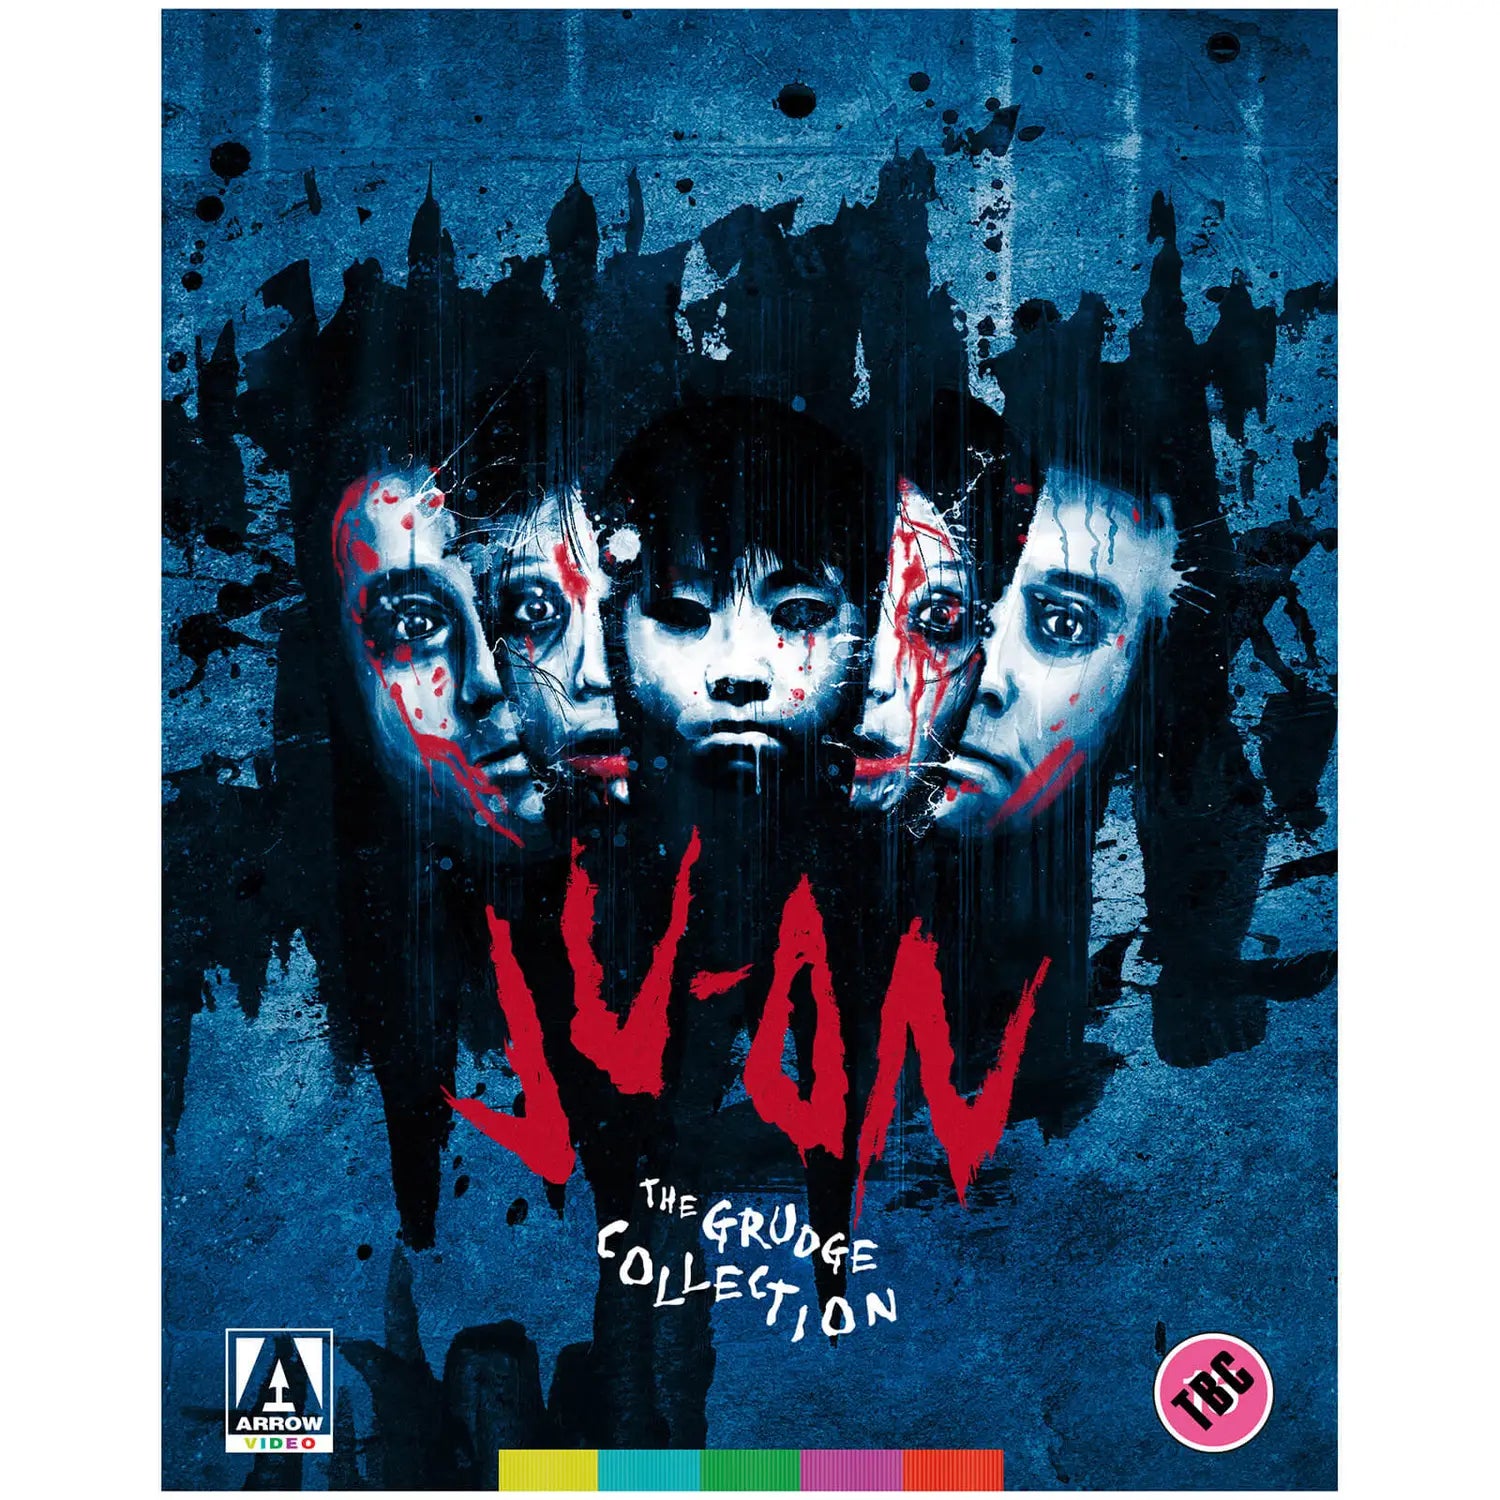 JU-ON: THE GRUDGE COLLECTION (REGION FREE/B IMPORT - LIMITED EDITION) 4K UHD/BLU-RAY